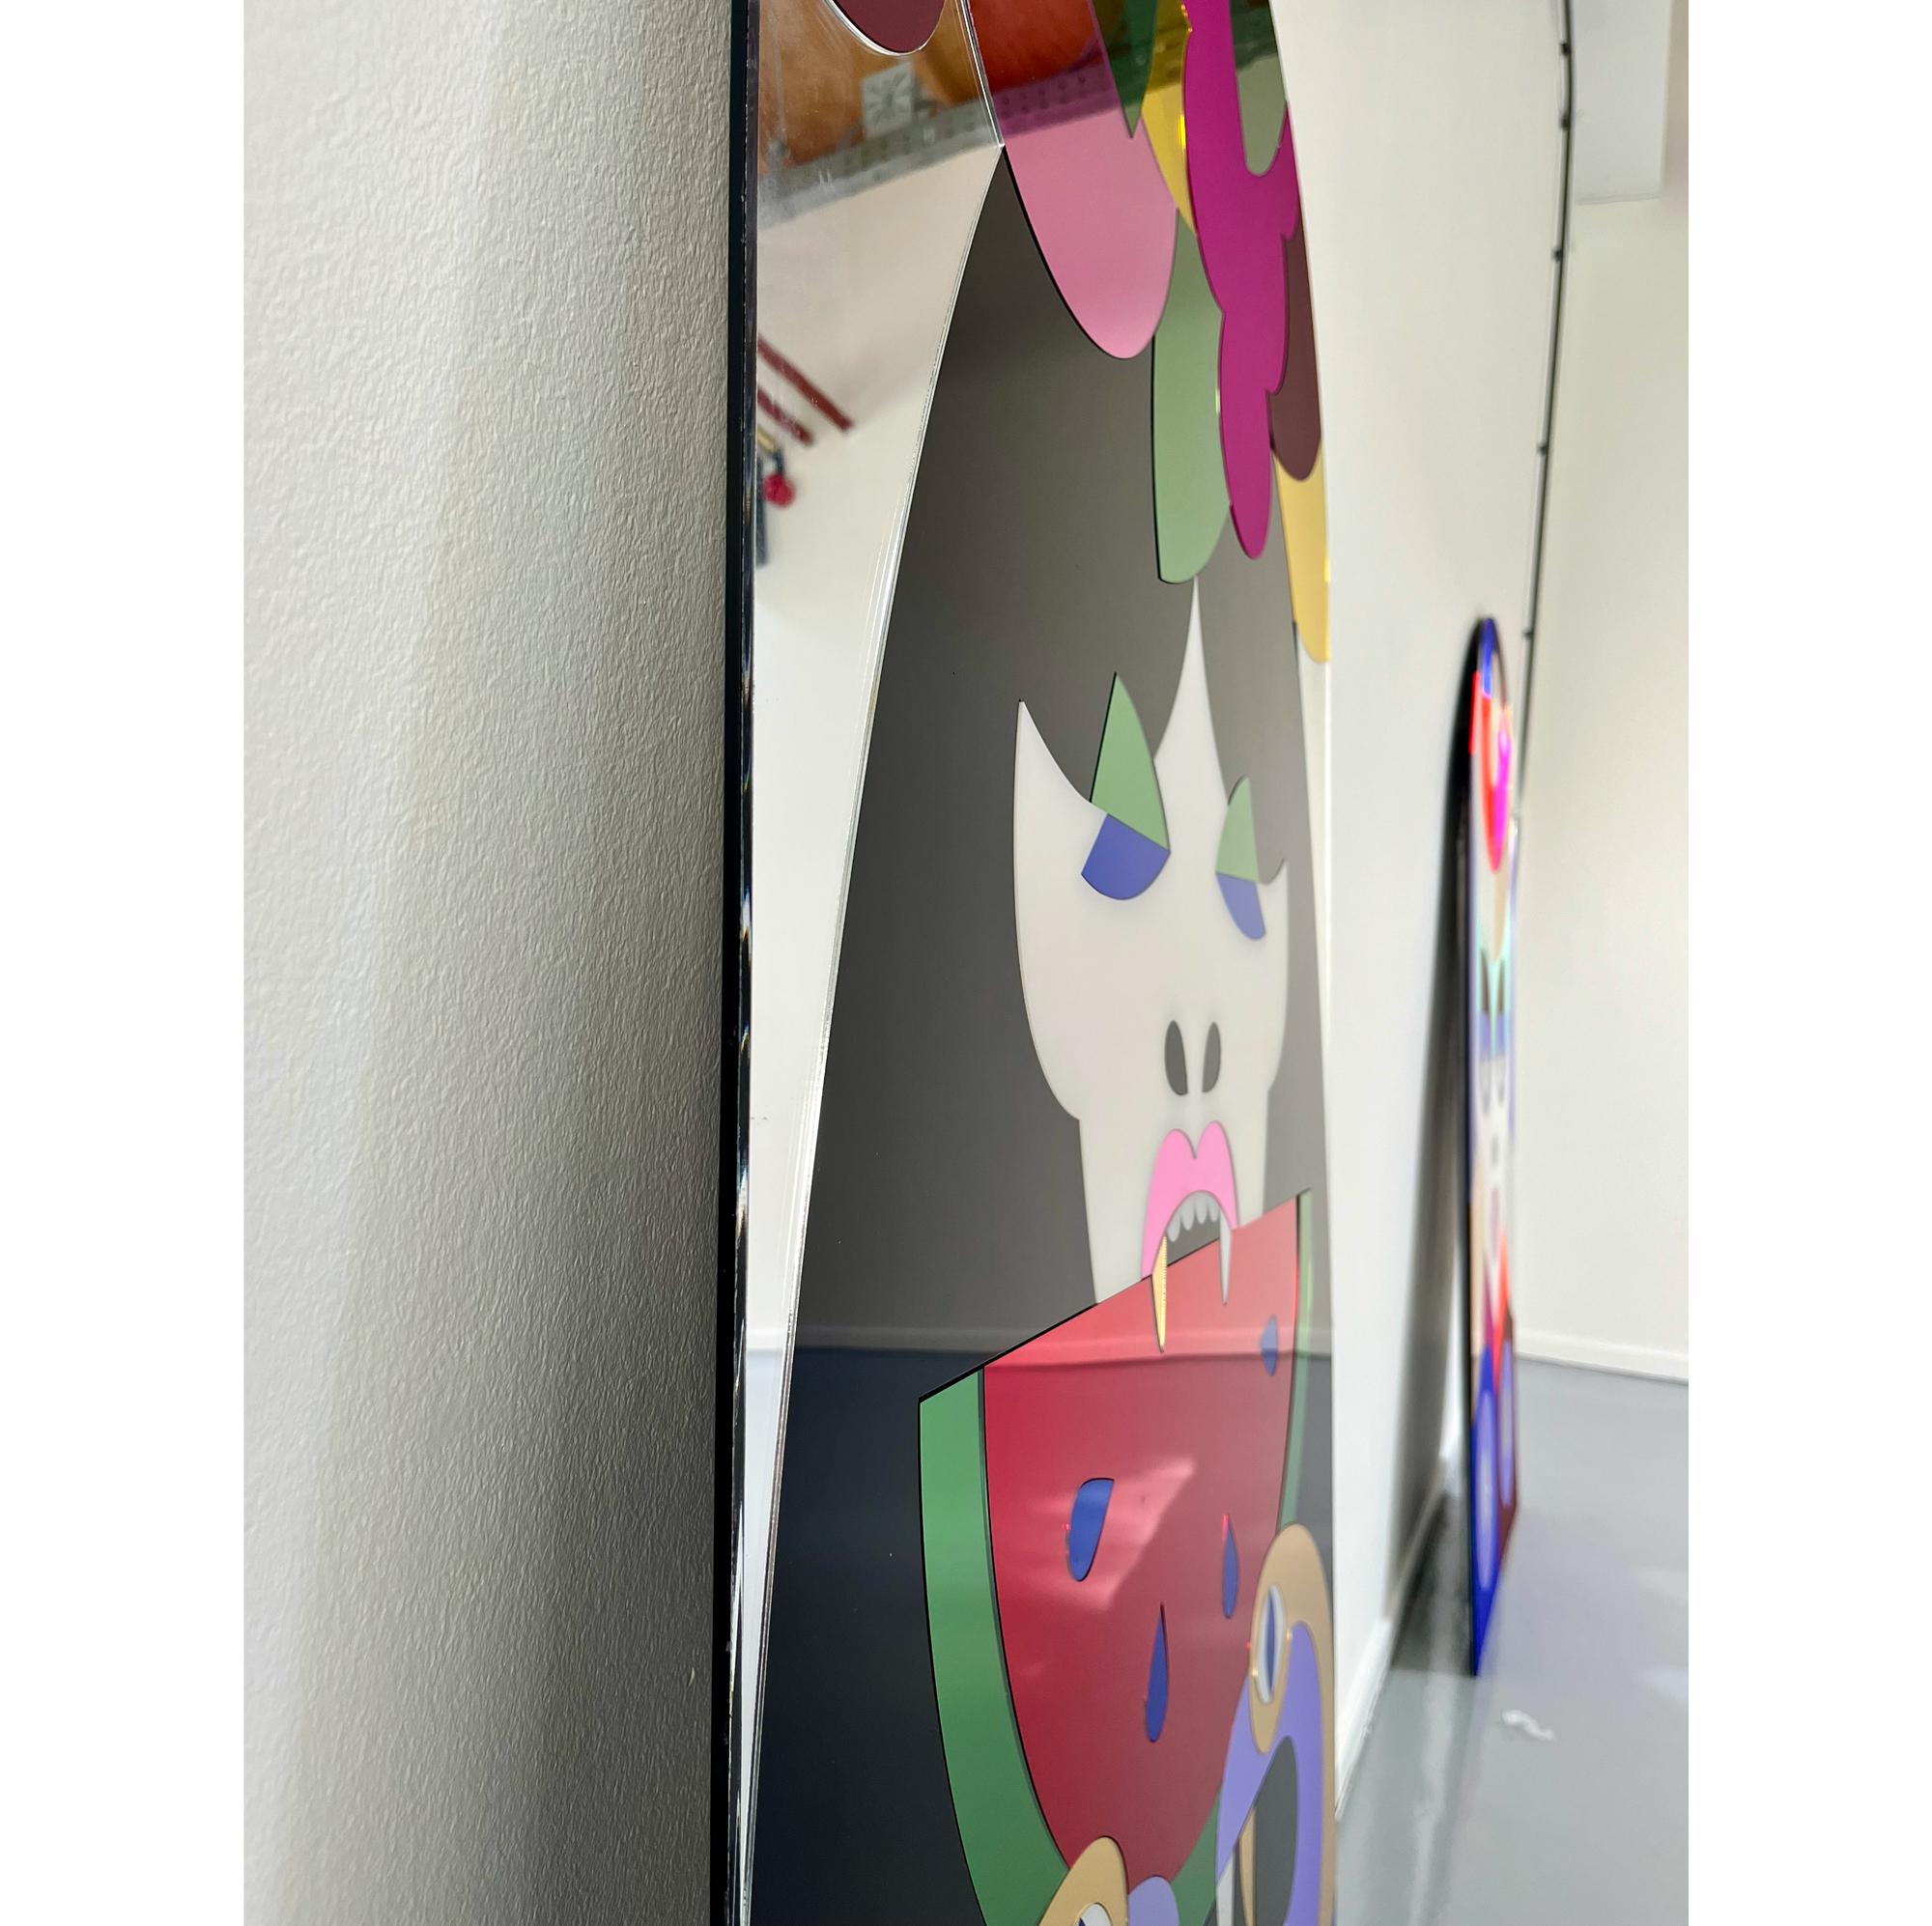 Forbidden Fruit, large colorful mirror artwork made of plexiglass For Sale 3